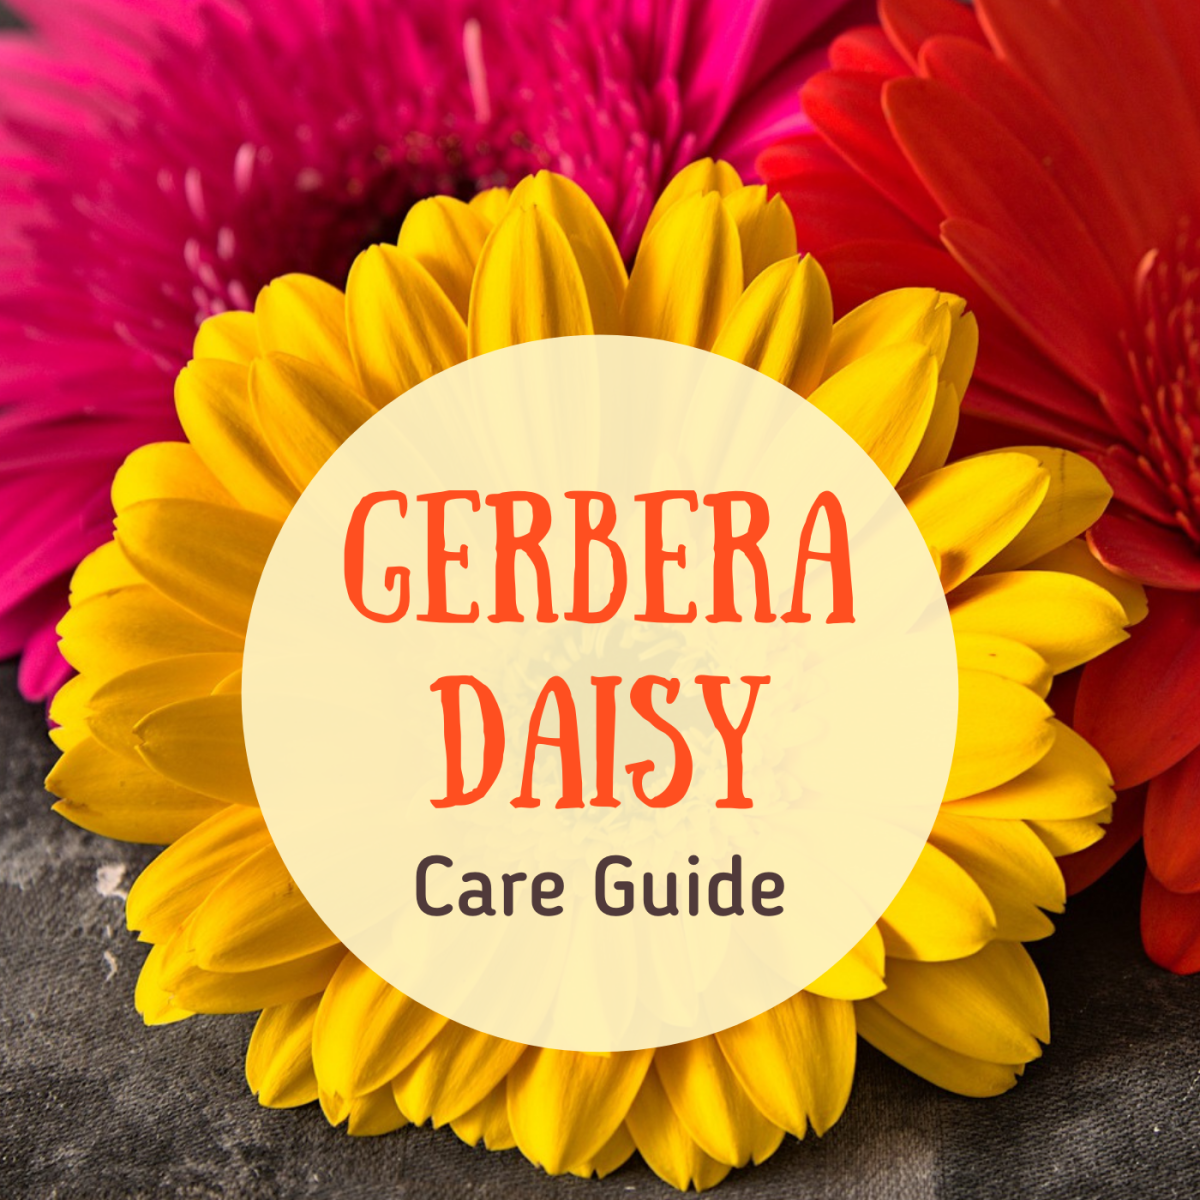 How to Care for the Gerbera Daisy